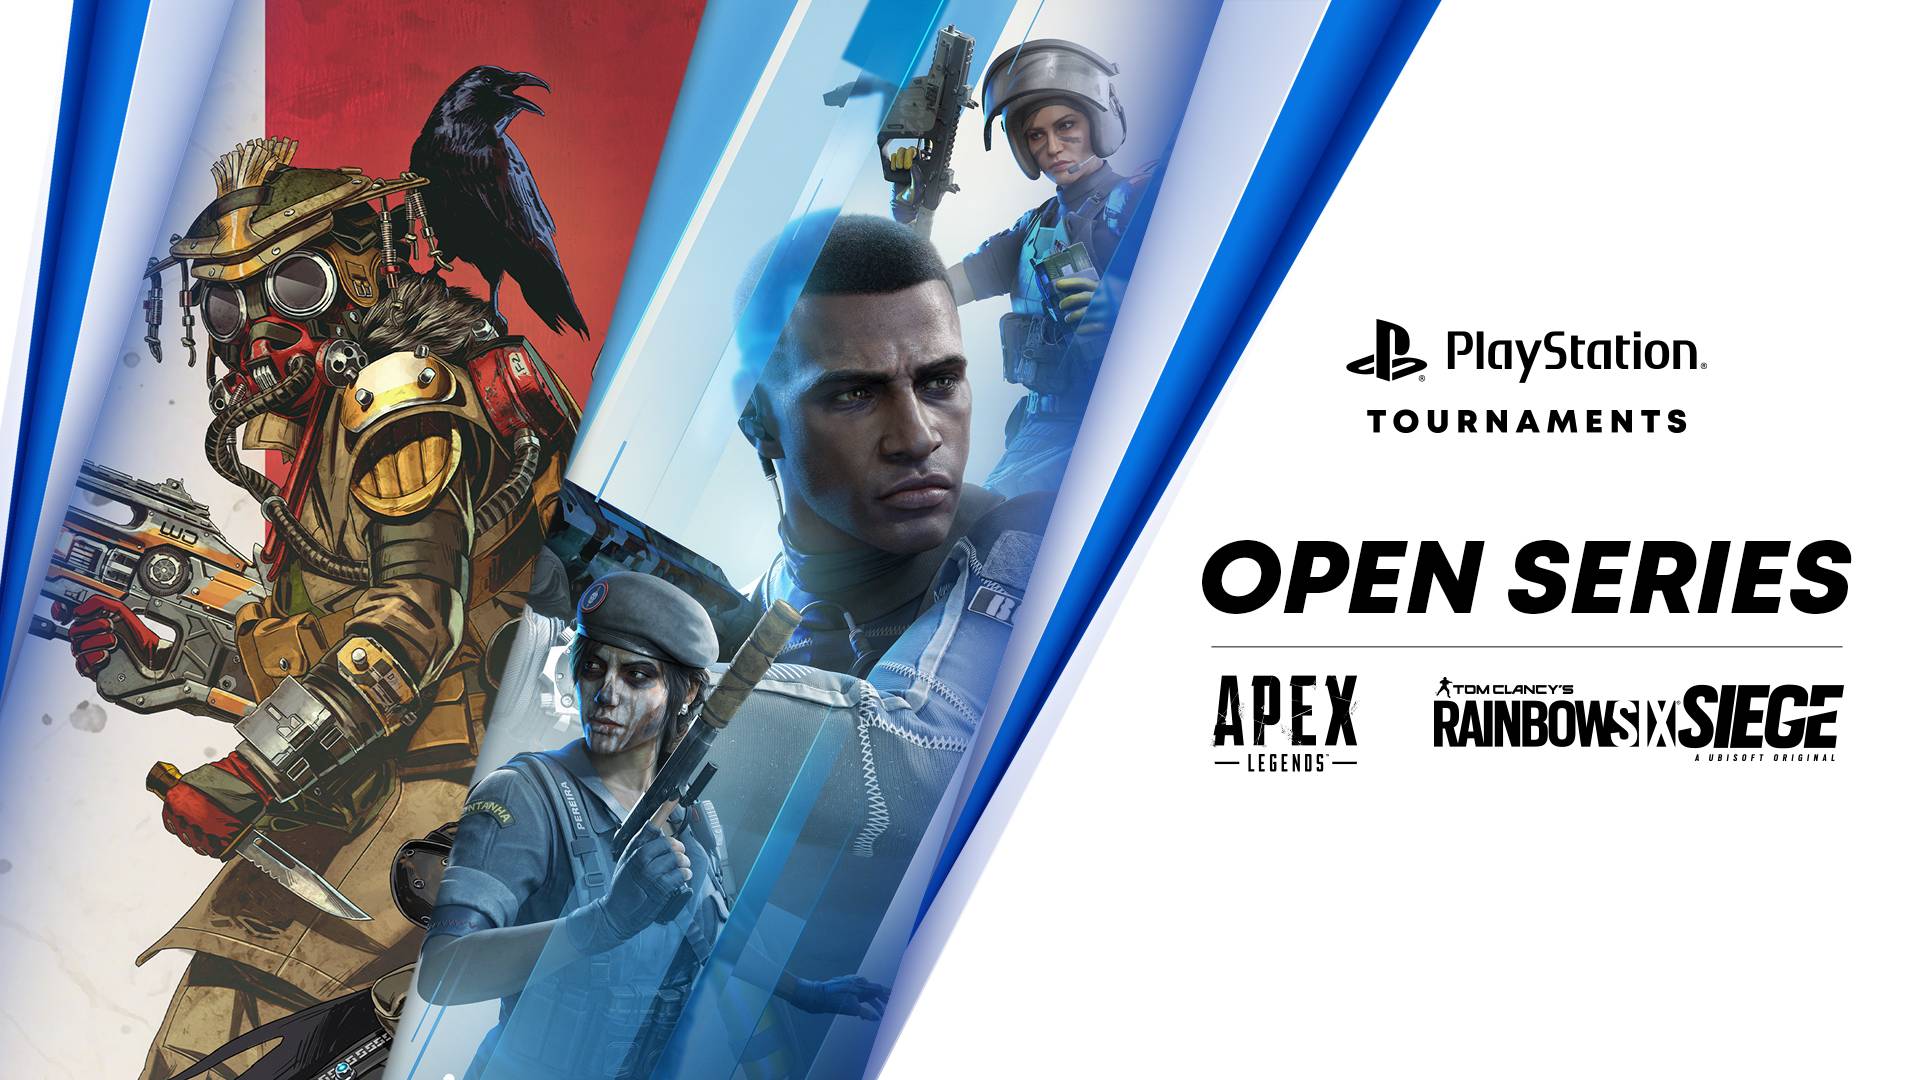 Rainbow 6: Joining the PlayStation Tournaments